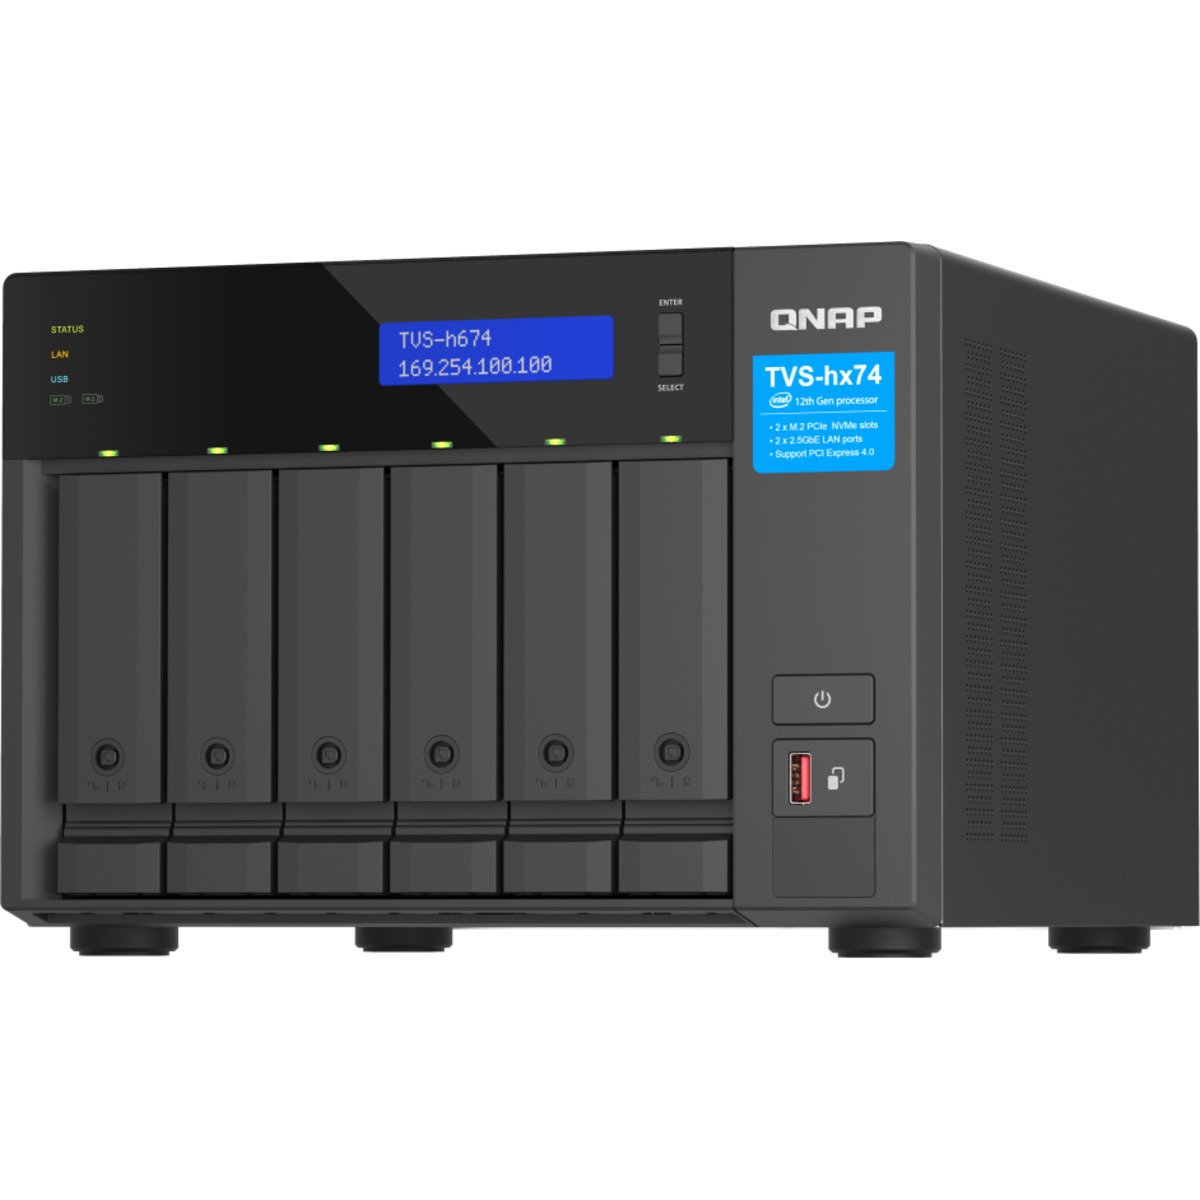 QNAP TVS-h674 Core i5 42tb 6-Bay Desktop Multimedia / Power User / Business NAS - Network Attached Storage Device 3x14tb Western Digital Red Pro WD142KFGX 3.5 7200rpm SATA 6Gb/s HDD NAS Class Drives Installed - Burn-In Tested TVS-h674 Core i5